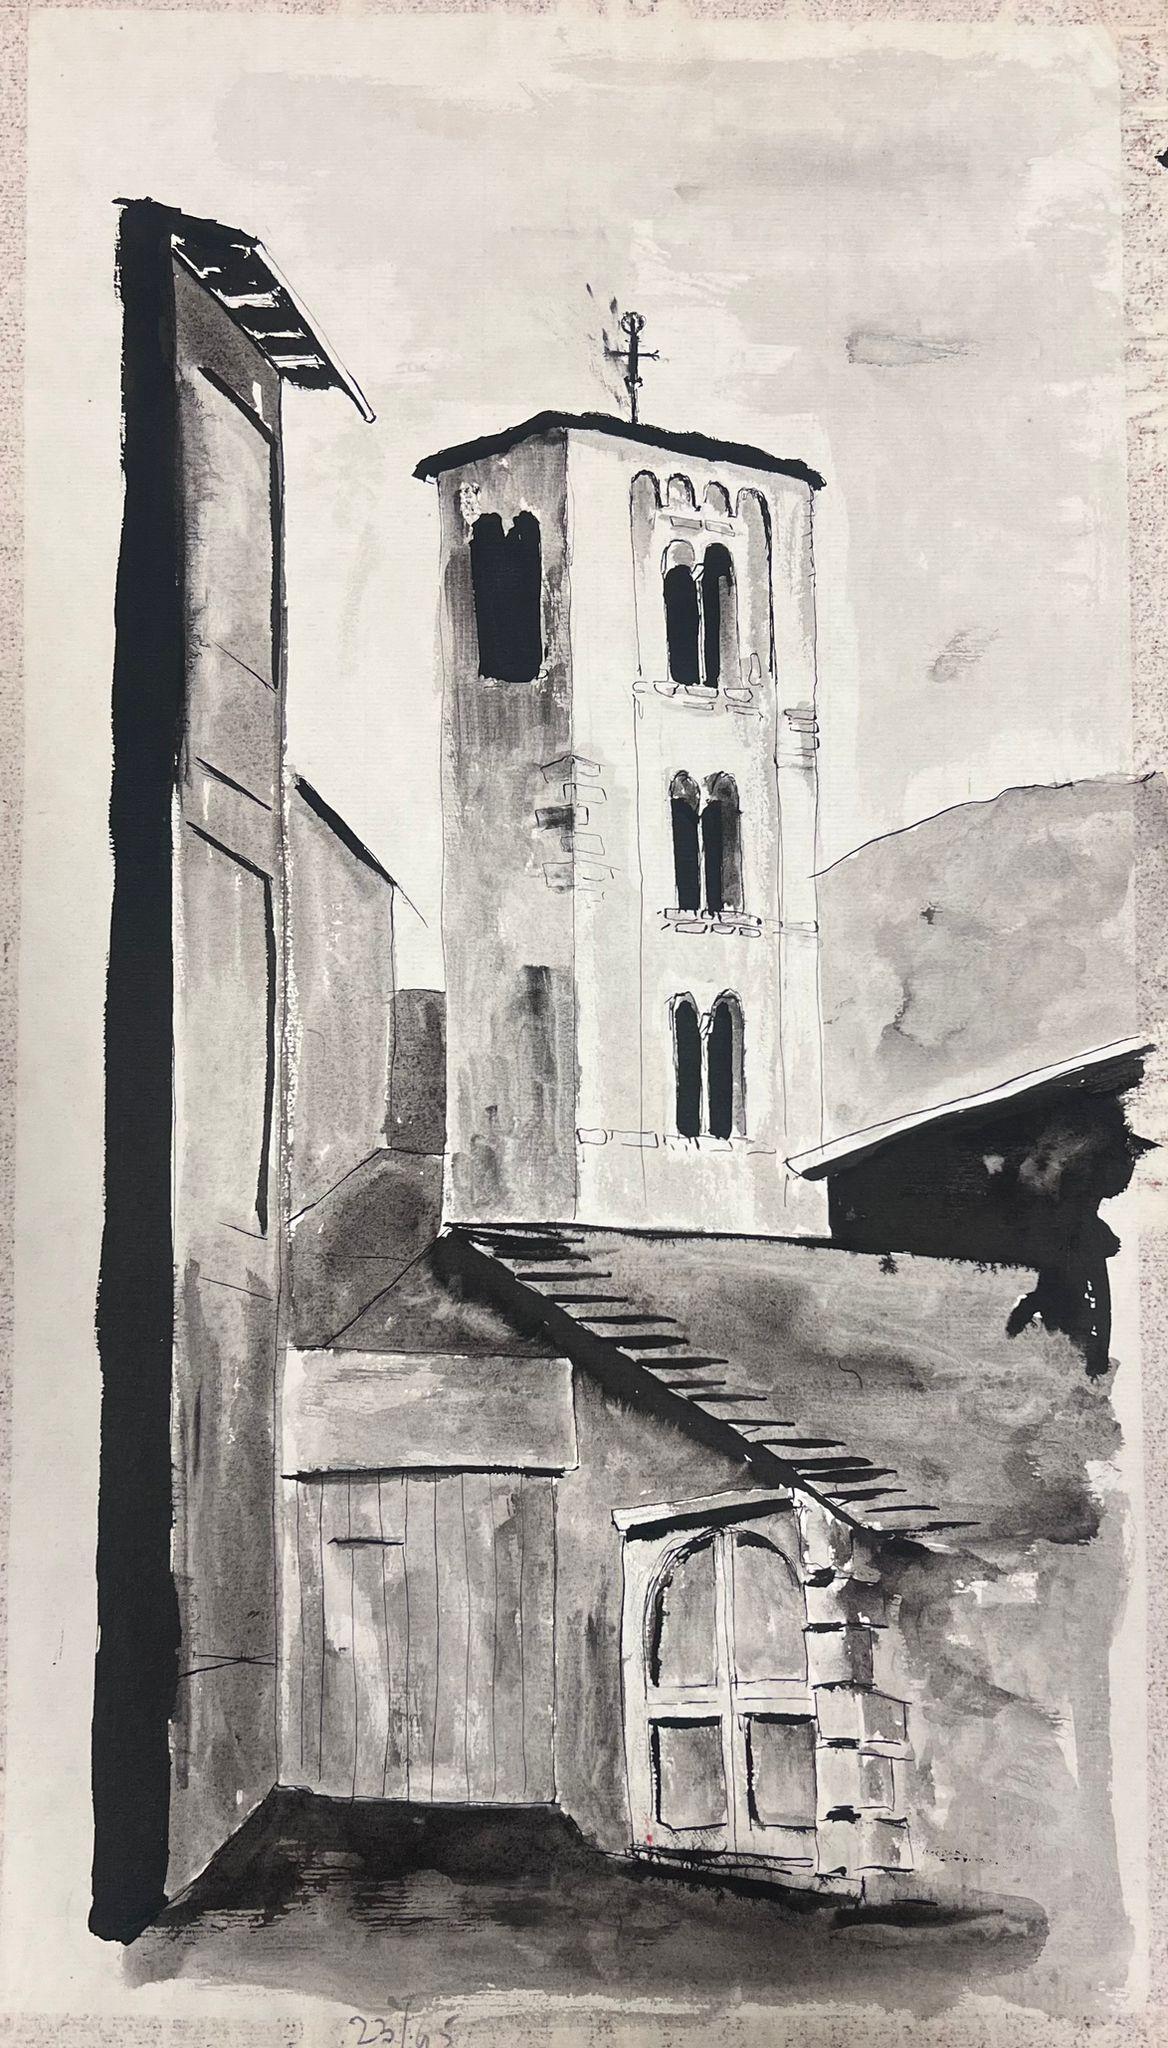 Bernard Labbe Landscape Painting - 1950's Modernist Painting Black and White Bell Tower Landscape